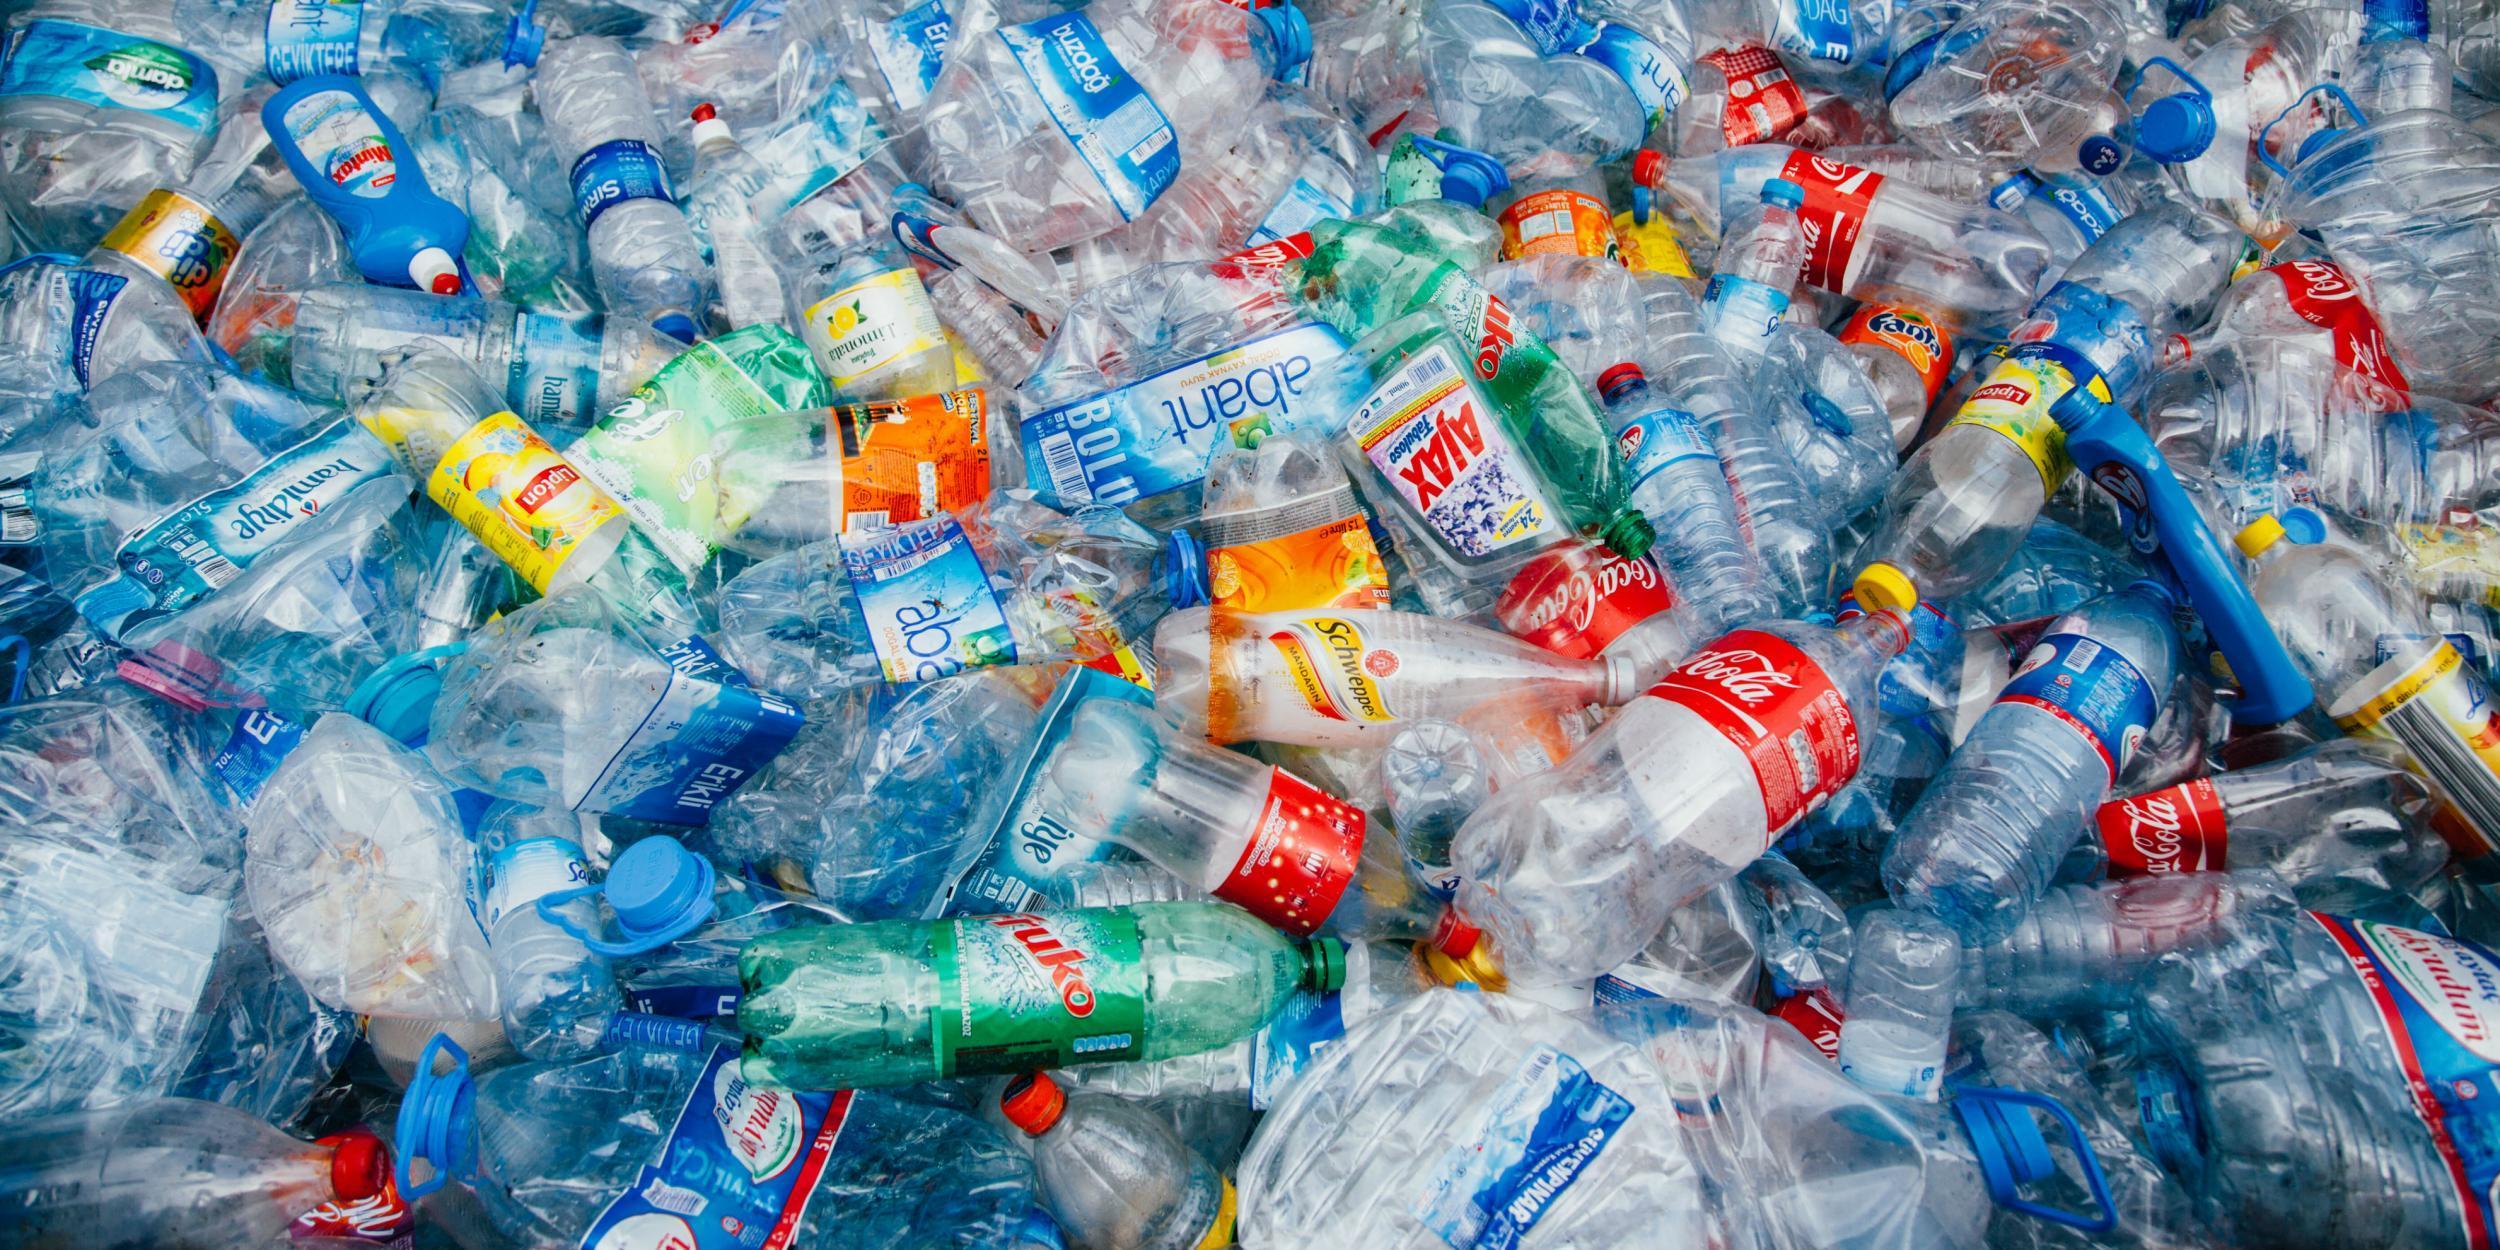 Brits Think Higher Taxes Will Reduce Plastic Pollution